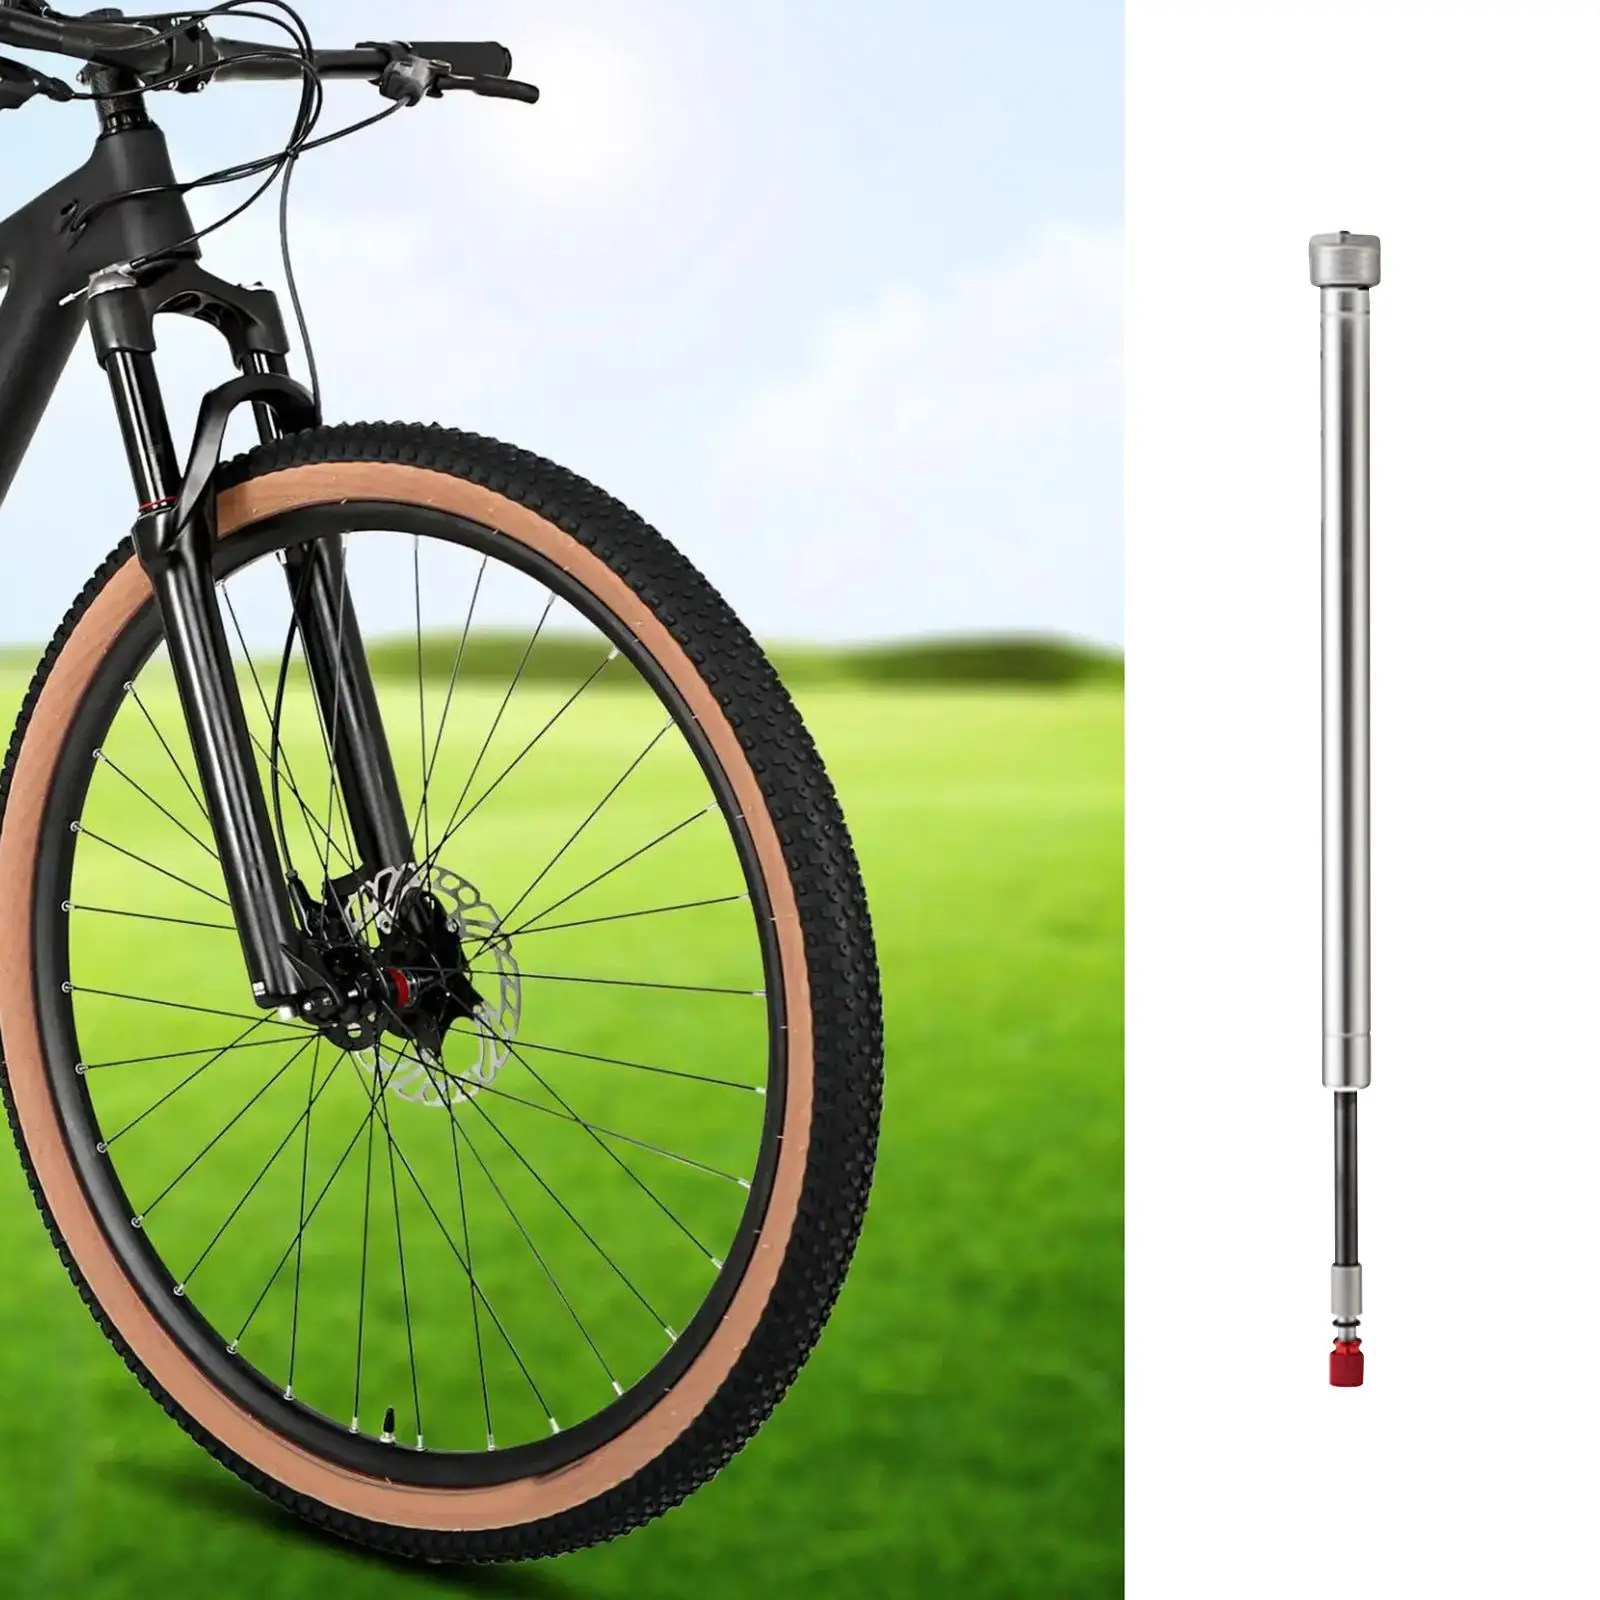 Front Fork Repair Rod Replacement Bike Suspension Fork Accessories Sturdy Easy to Install Air Damping Rod for Mountain Bike